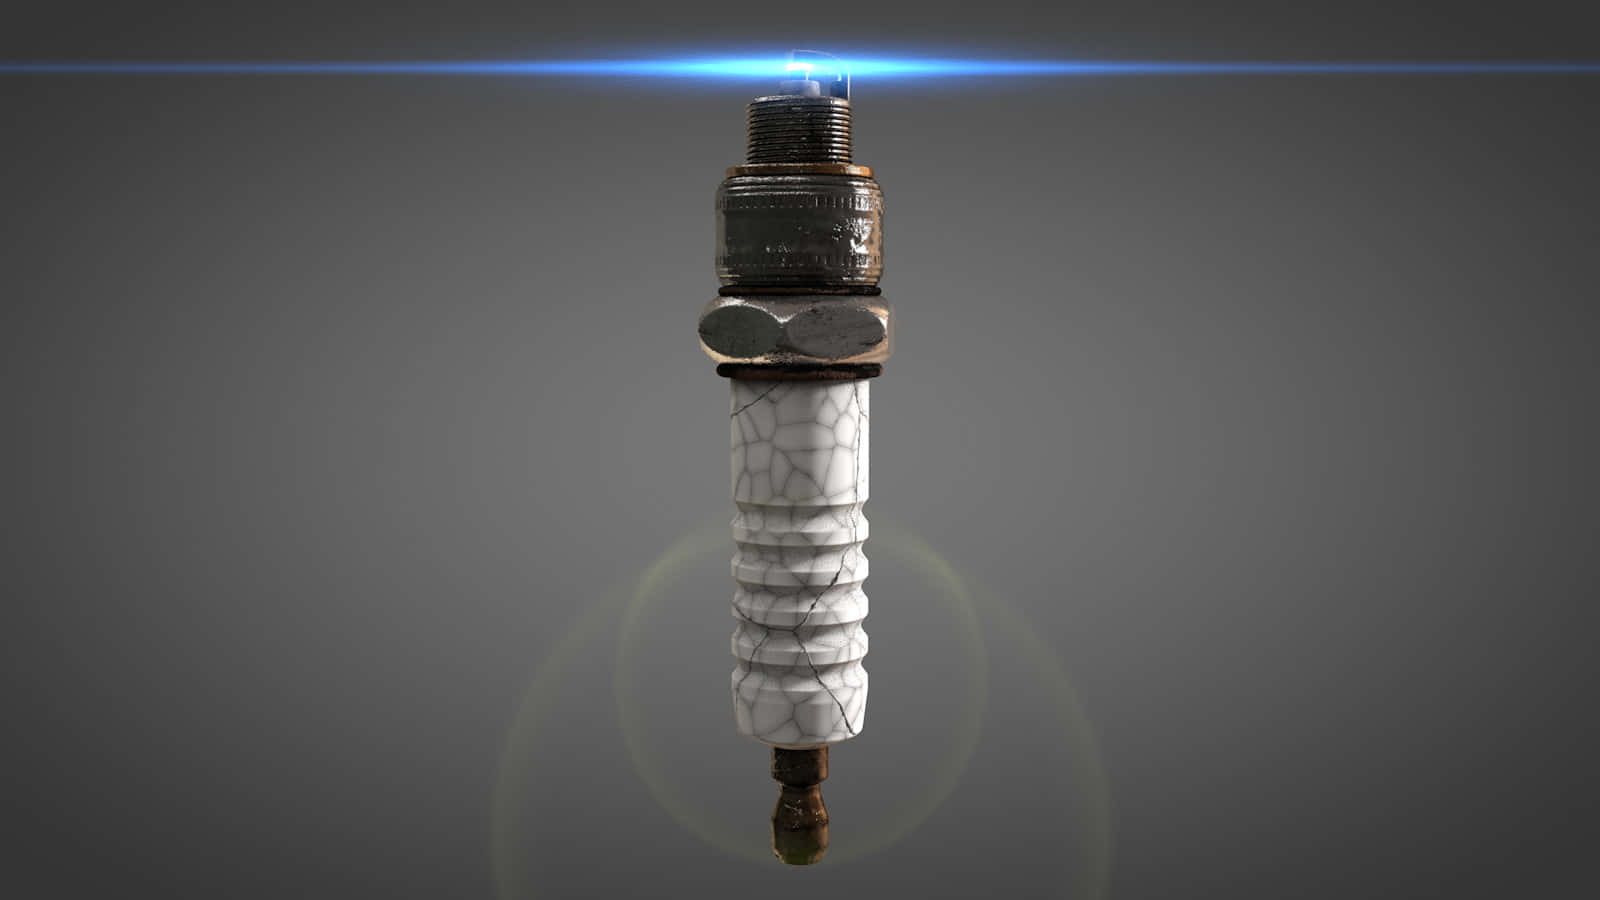 A 3d Model Of A Syringe With A Light On It Wallpaper